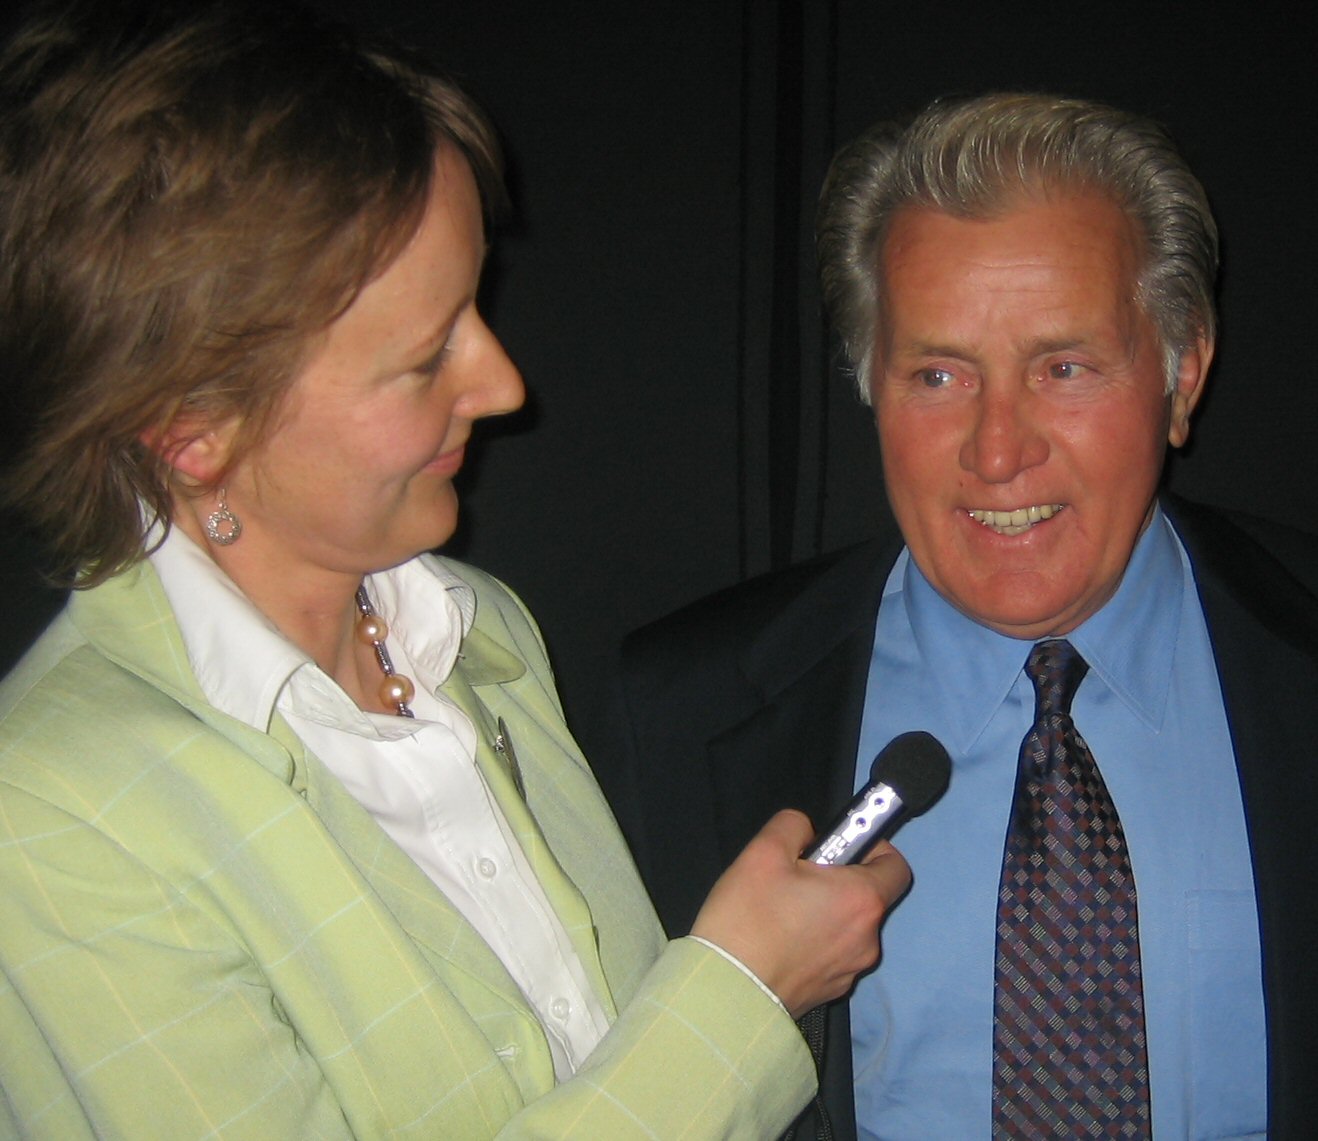 Martin Sheen: Our responsibility to future generations